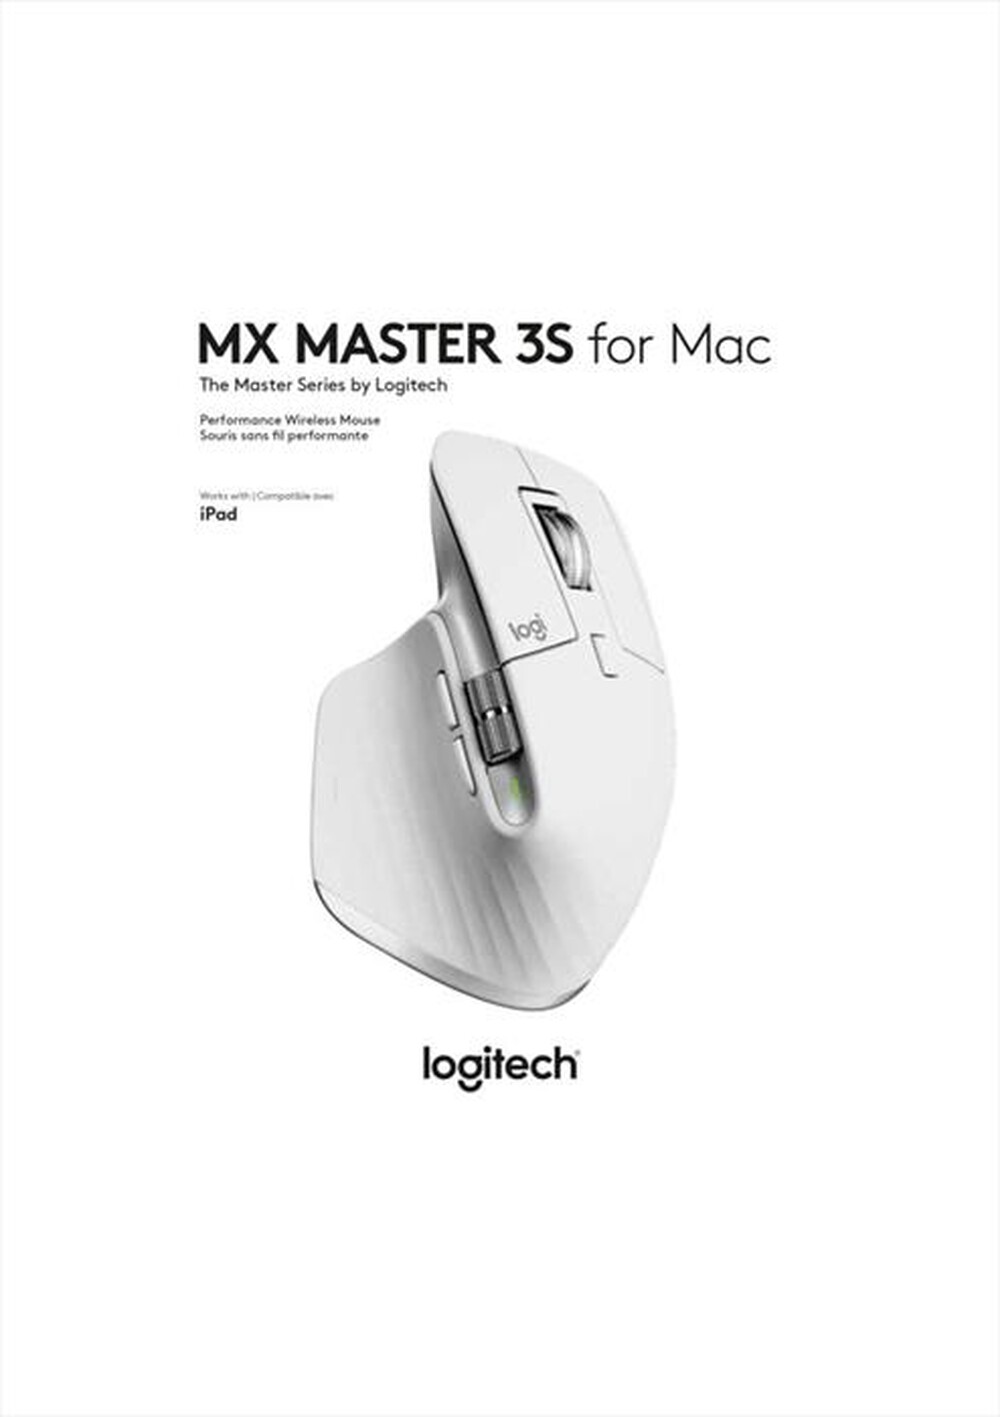 "LOGITECH - Mouse MX Master 3S For Mac-Pale Grey"